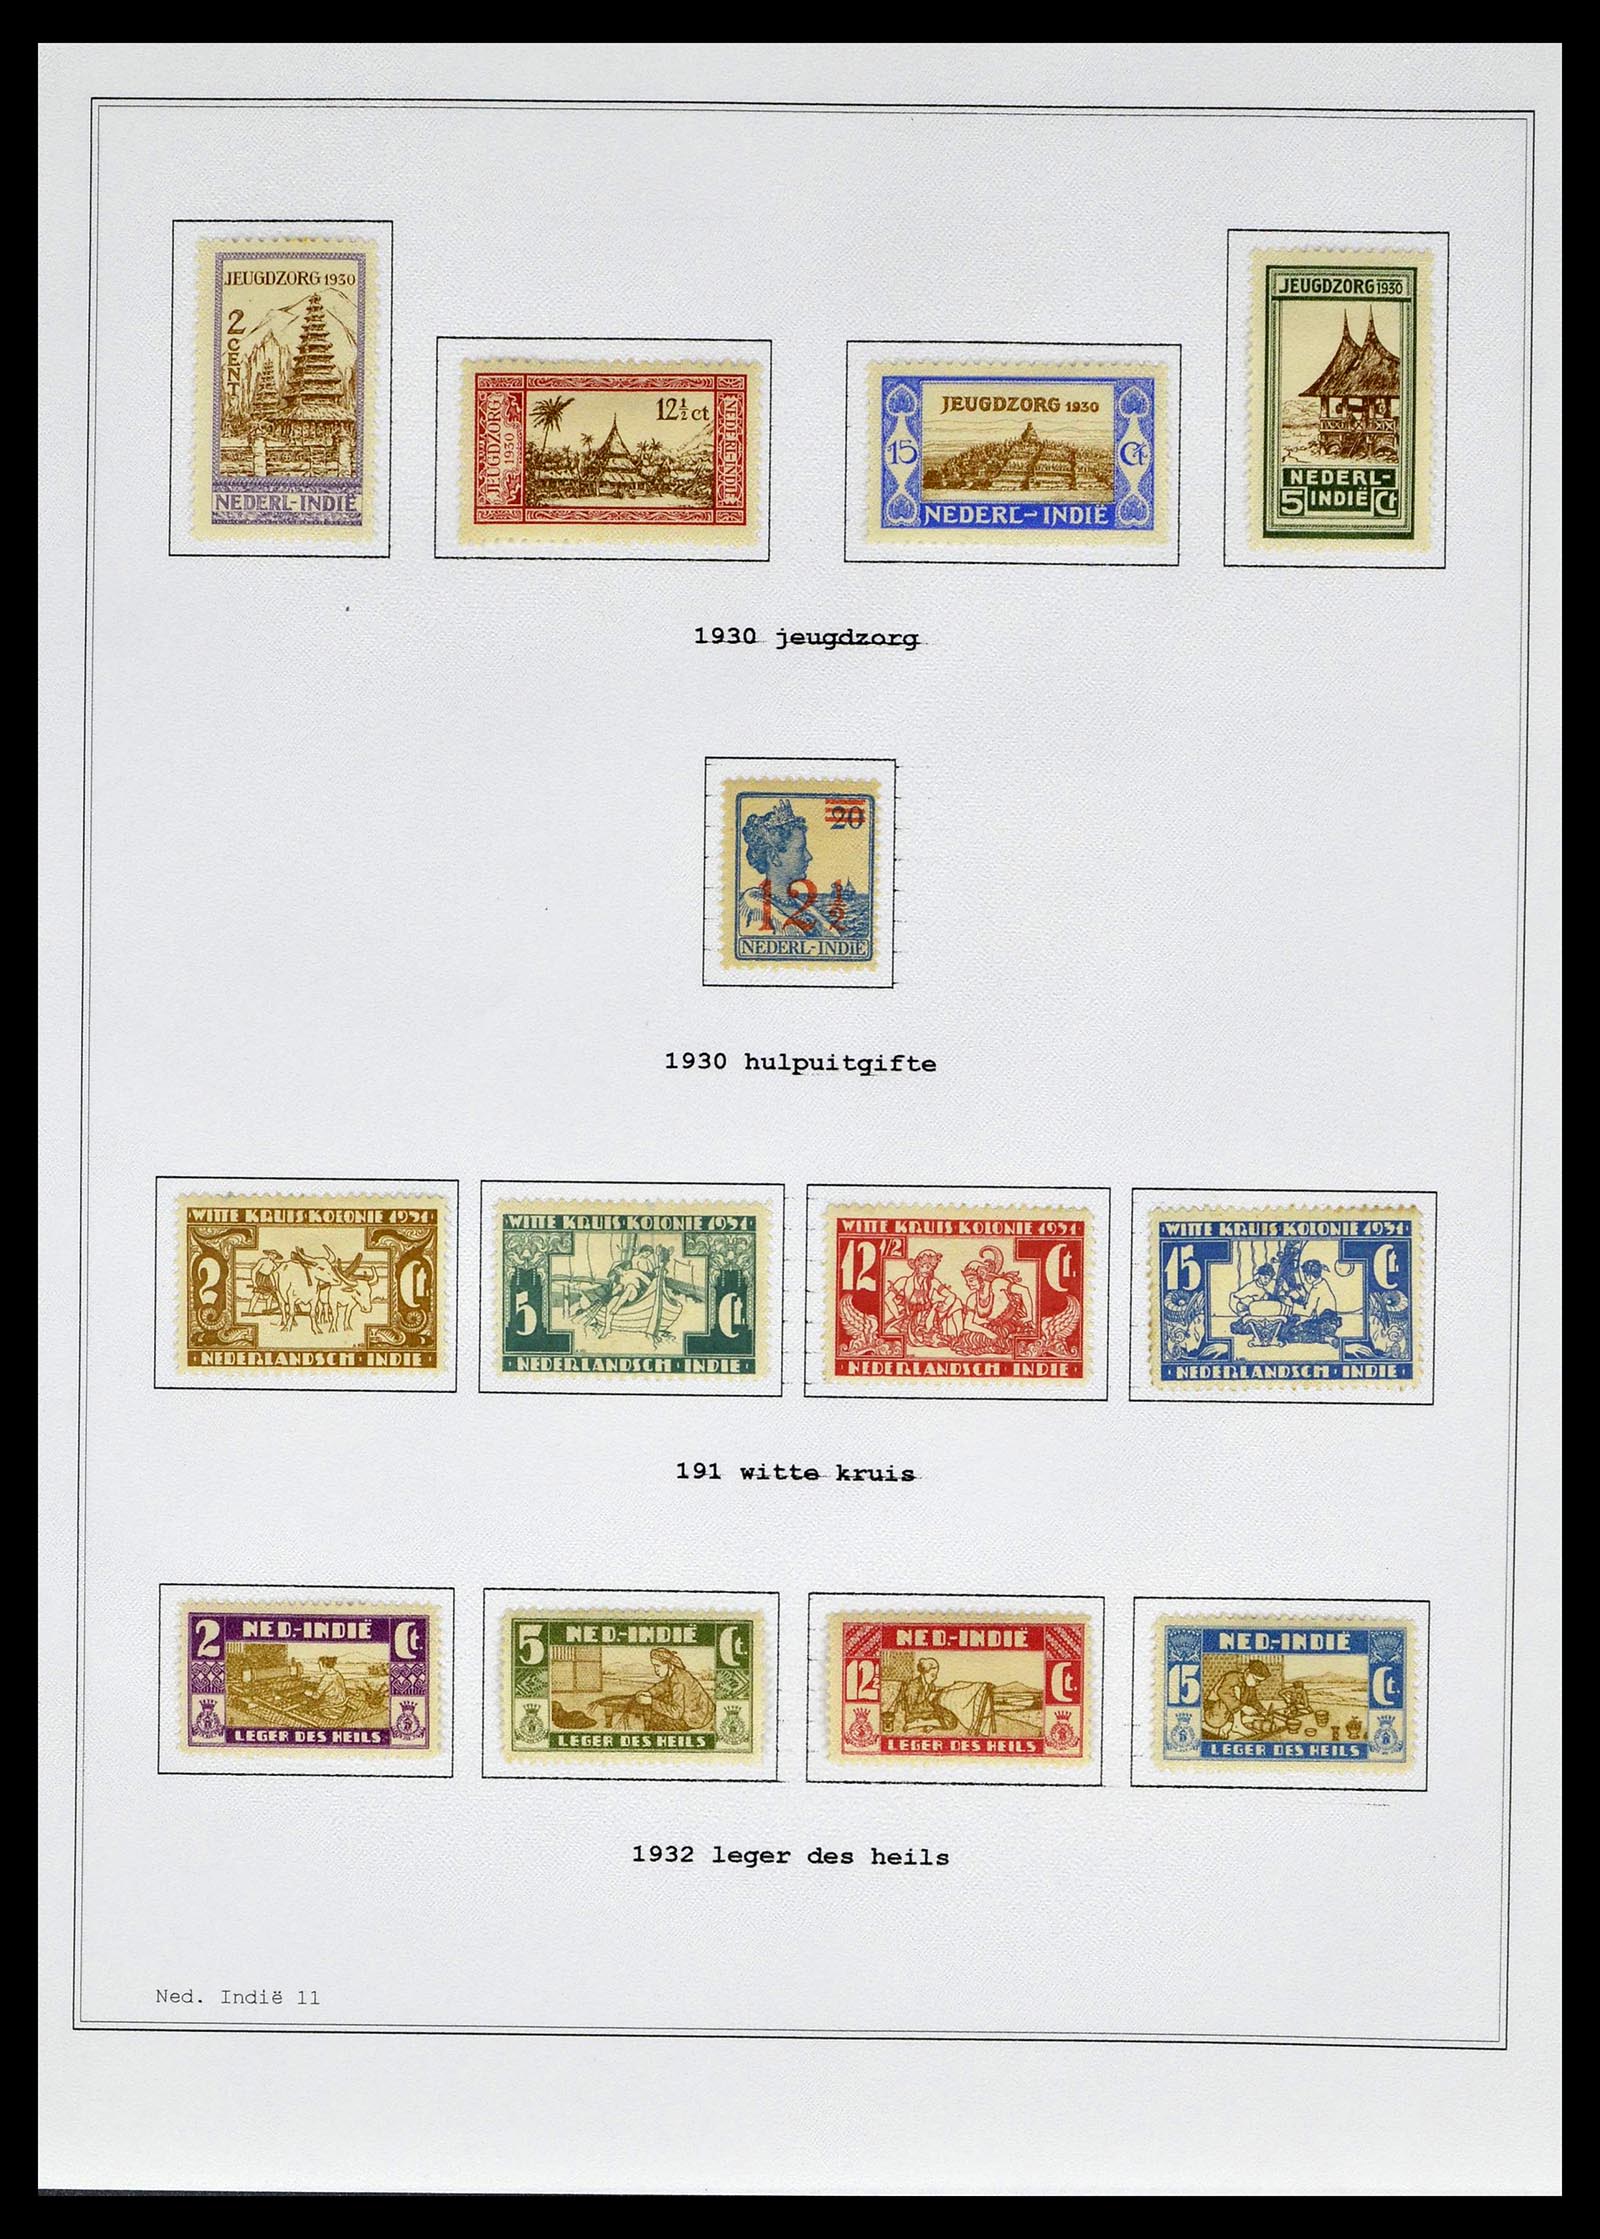 39026 0021 - Stamp collection 39026 Dutch east Indies and Suriname 1864-1975.